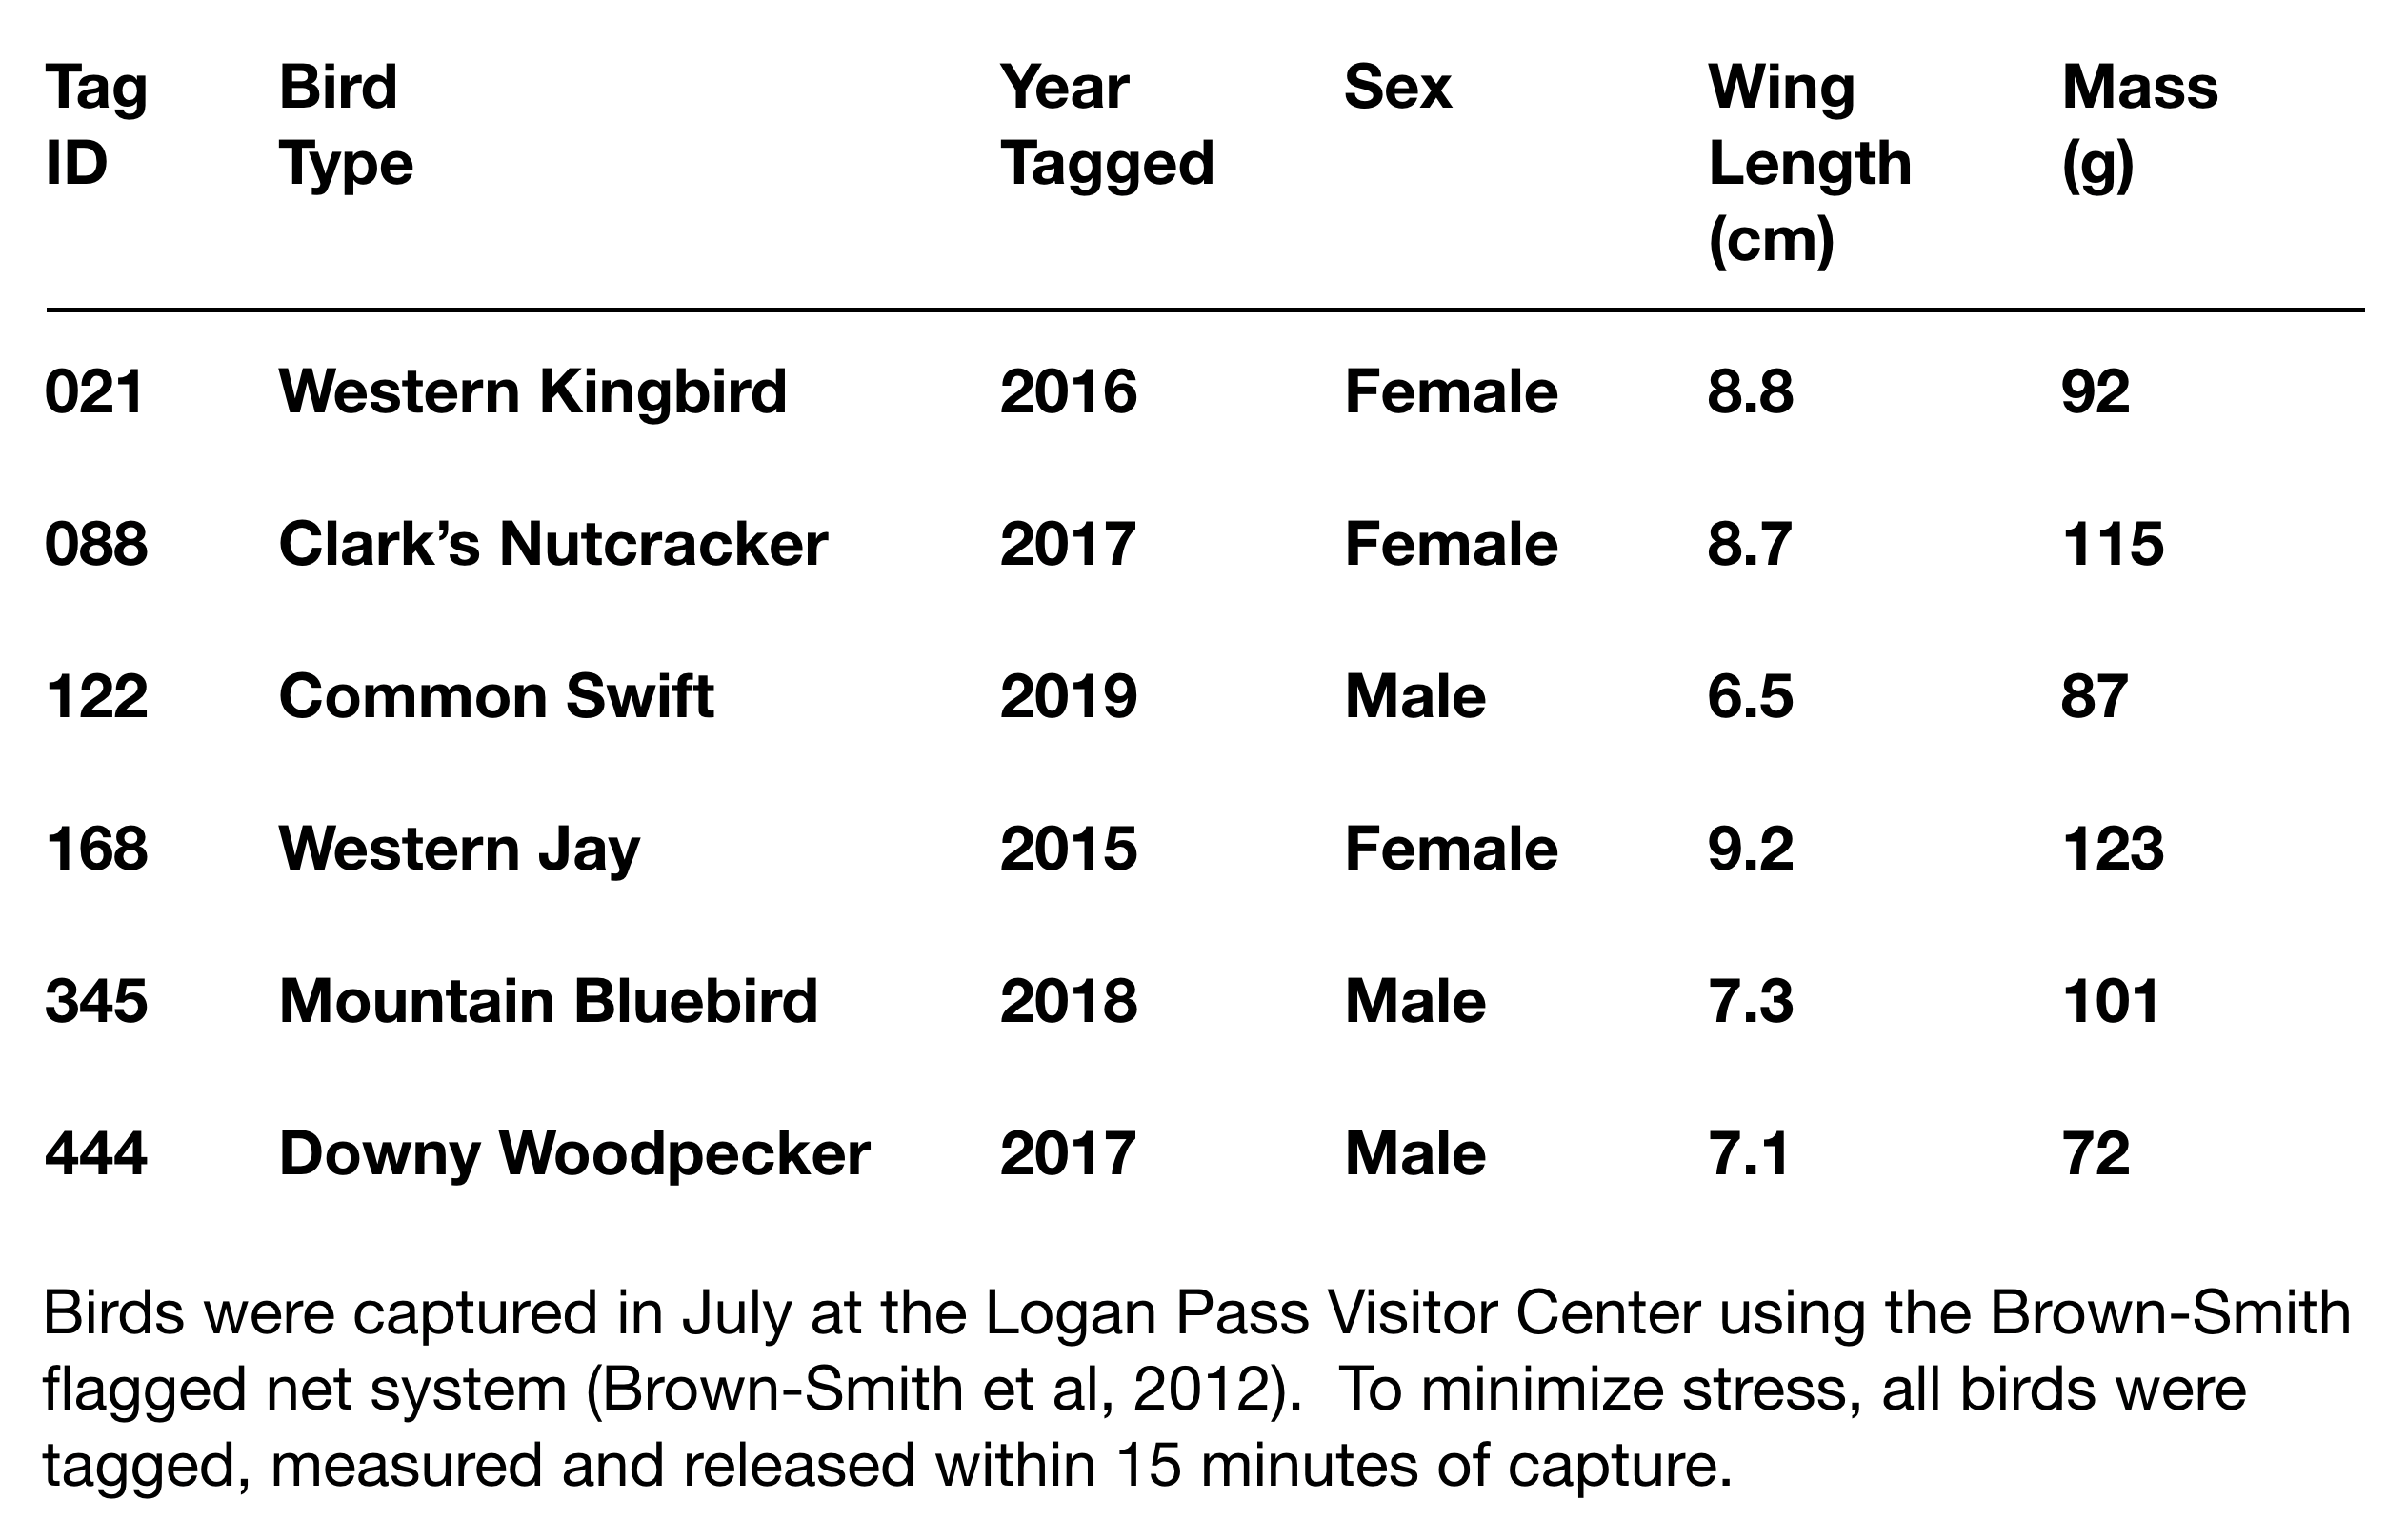 table showing tag ID, bird type, year tagged, sex, wing length, and mass for an example data collection of bird banding